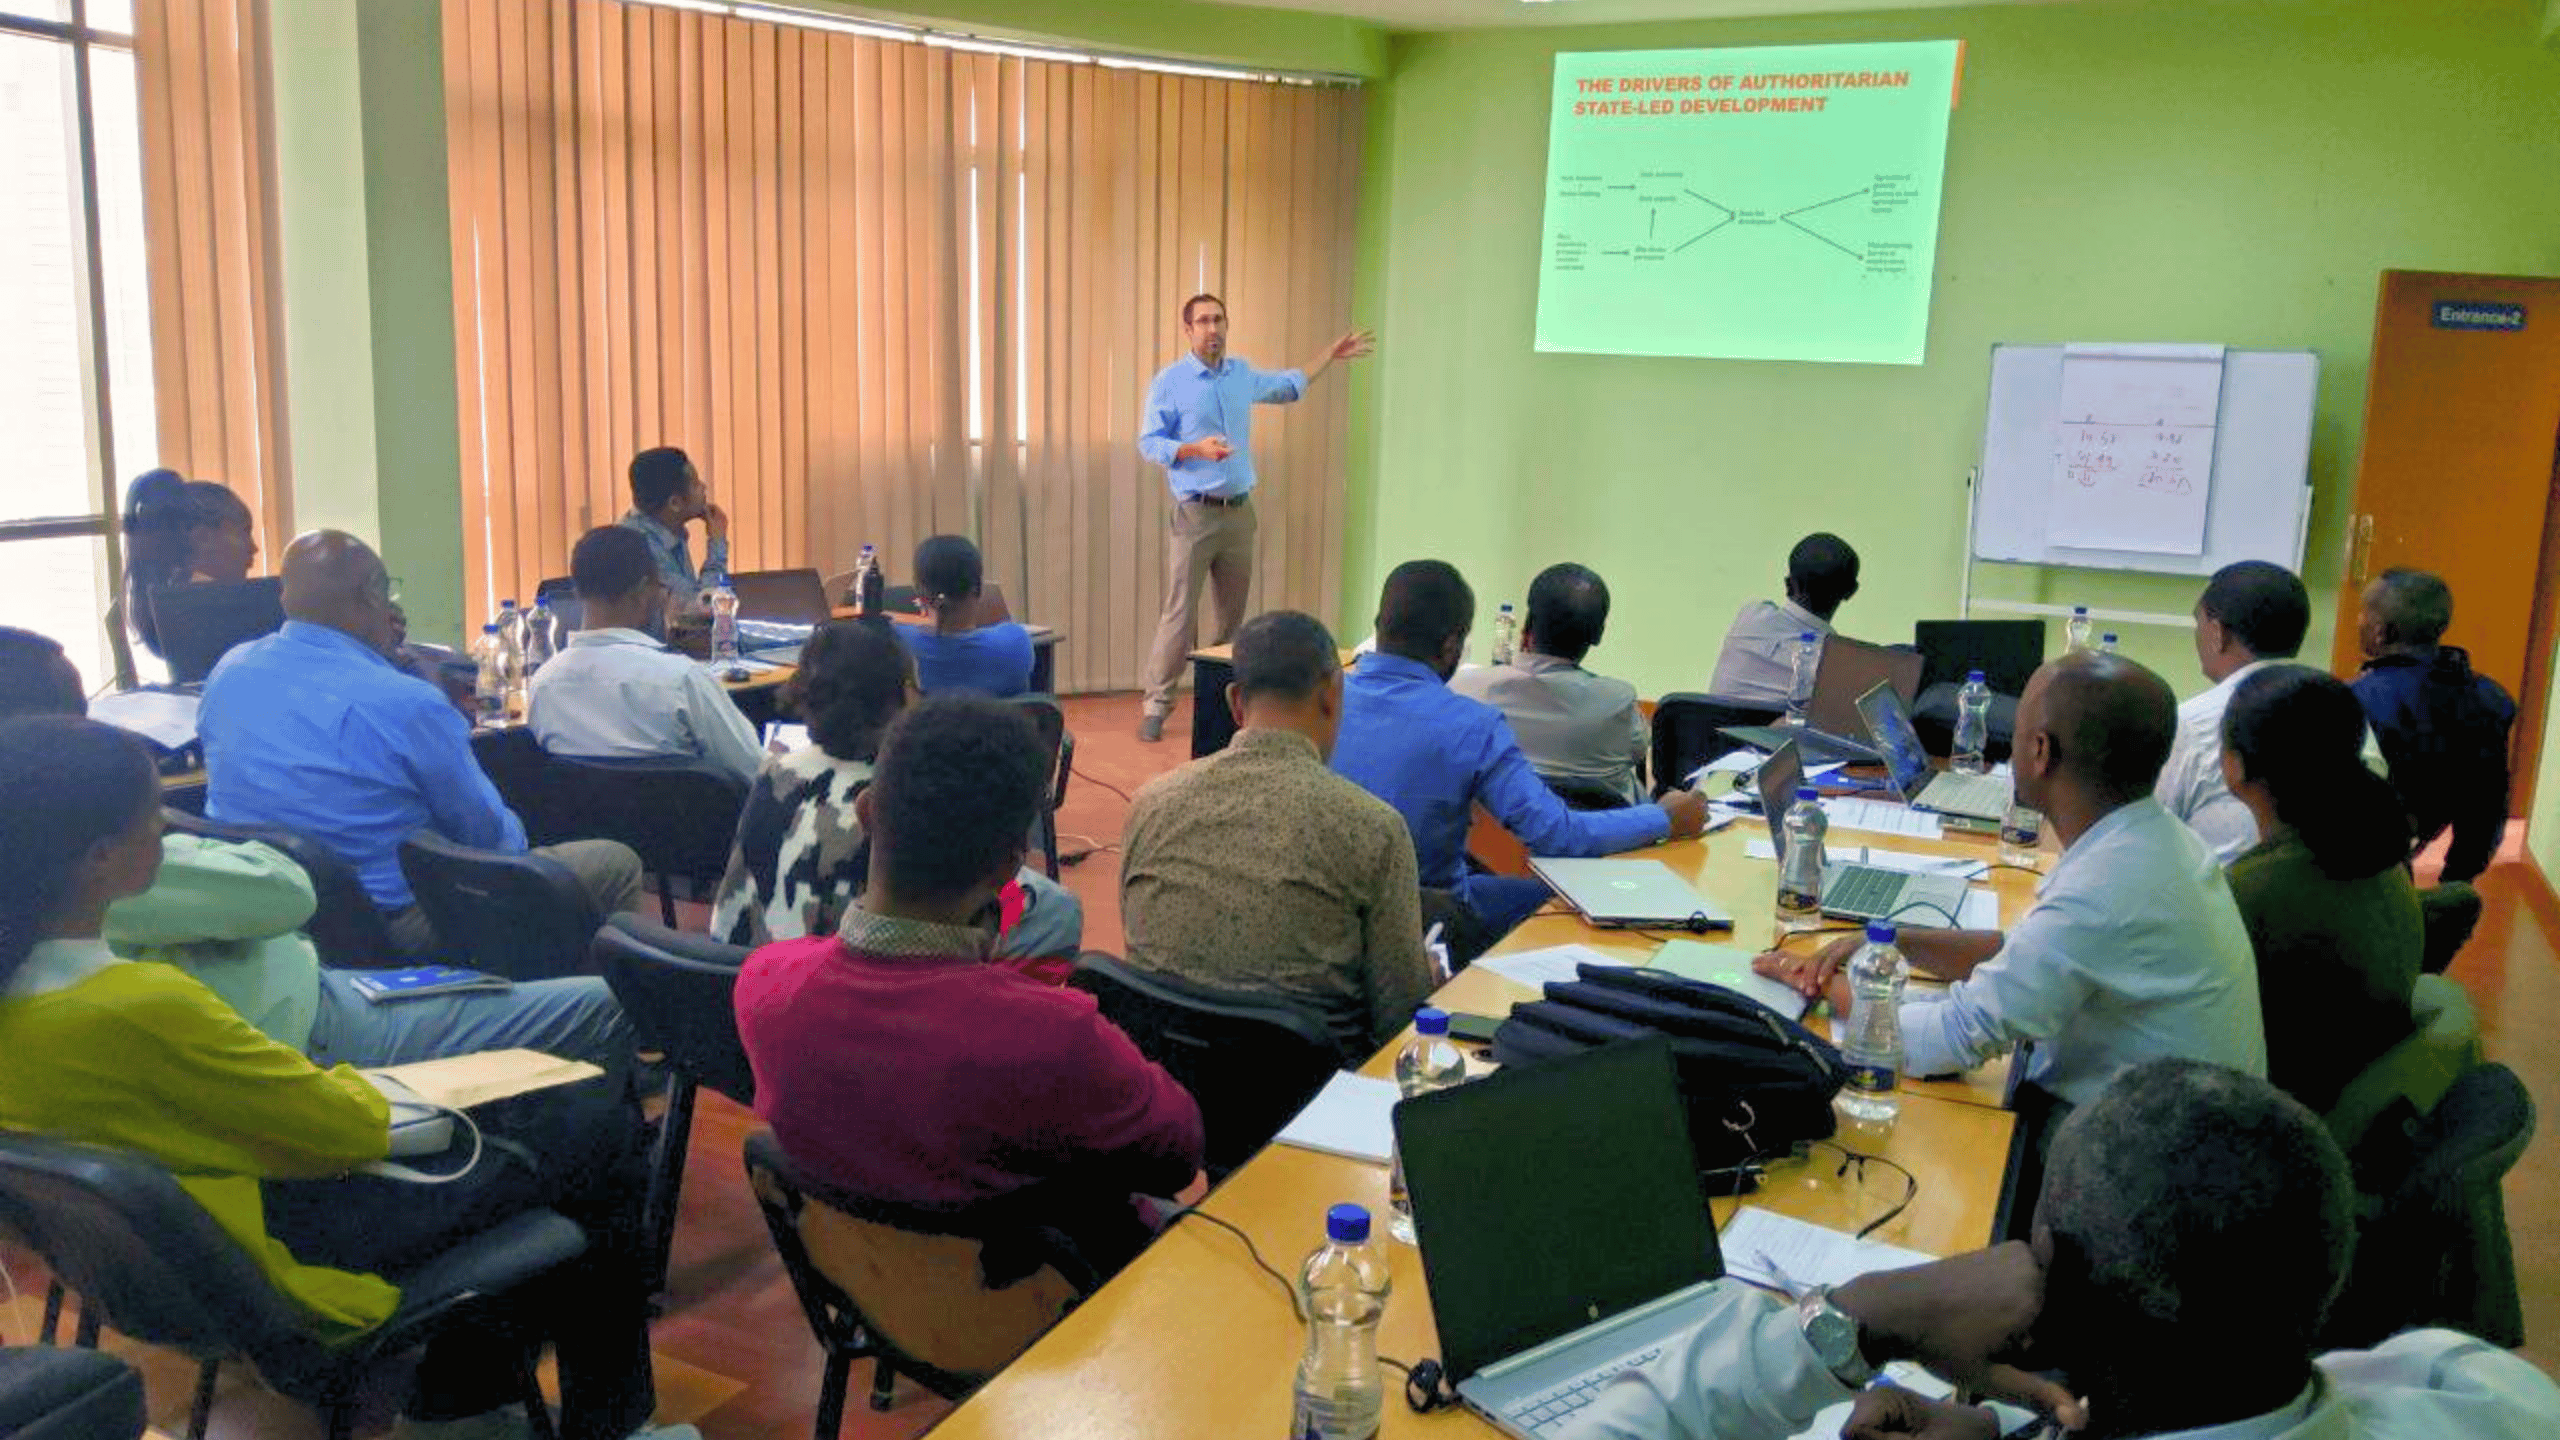 
Dr. Tom Lavers Delivers Insightful Talk on Ethiopian Development to EEA Members and Researchers
